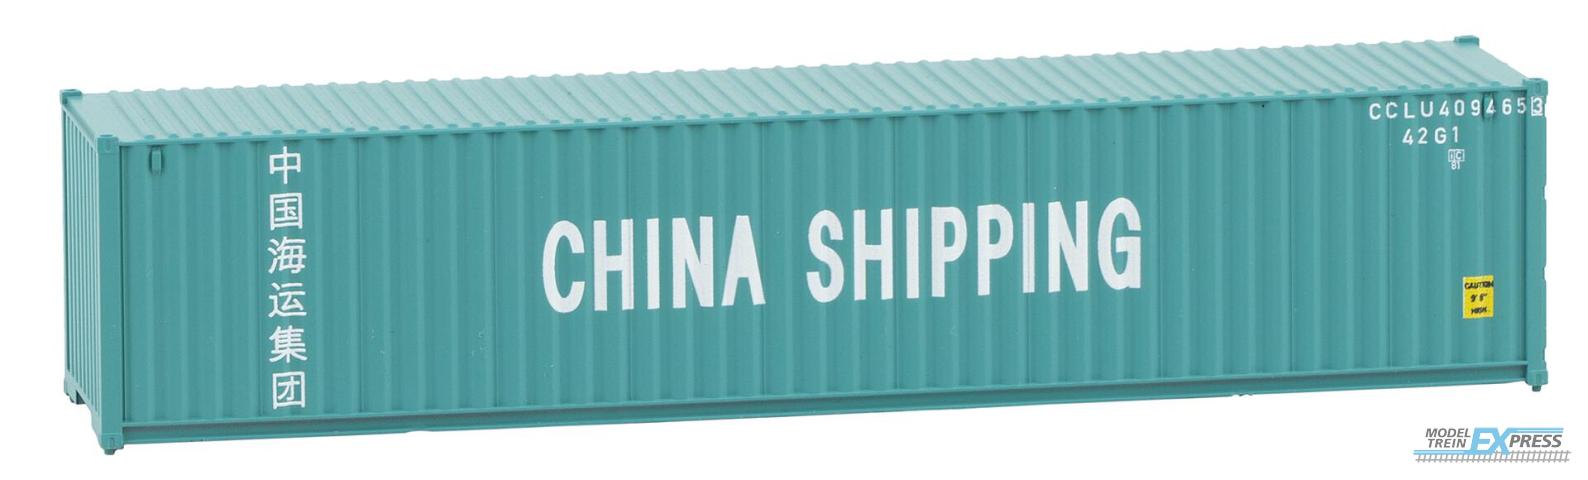 Faller 182101 1/87 40' CONTAINER CHINA SHIPPING